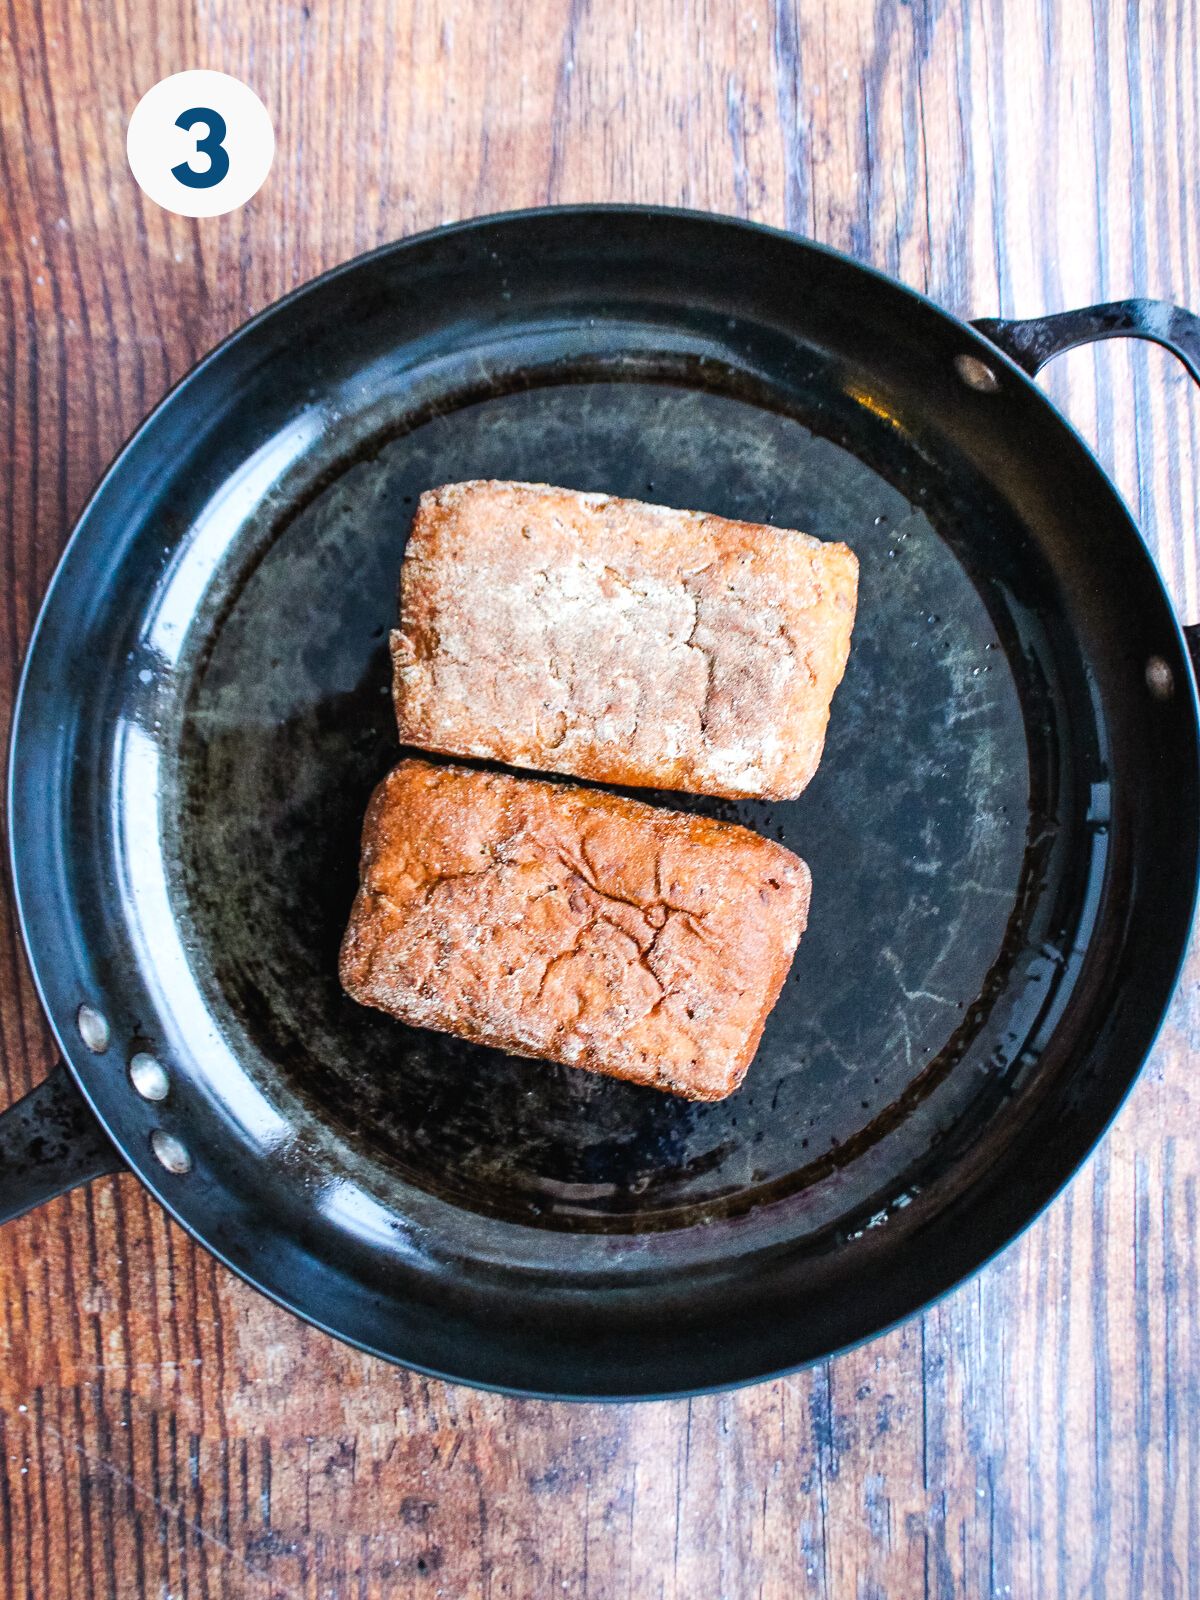 Toasting the bread in a skillet.